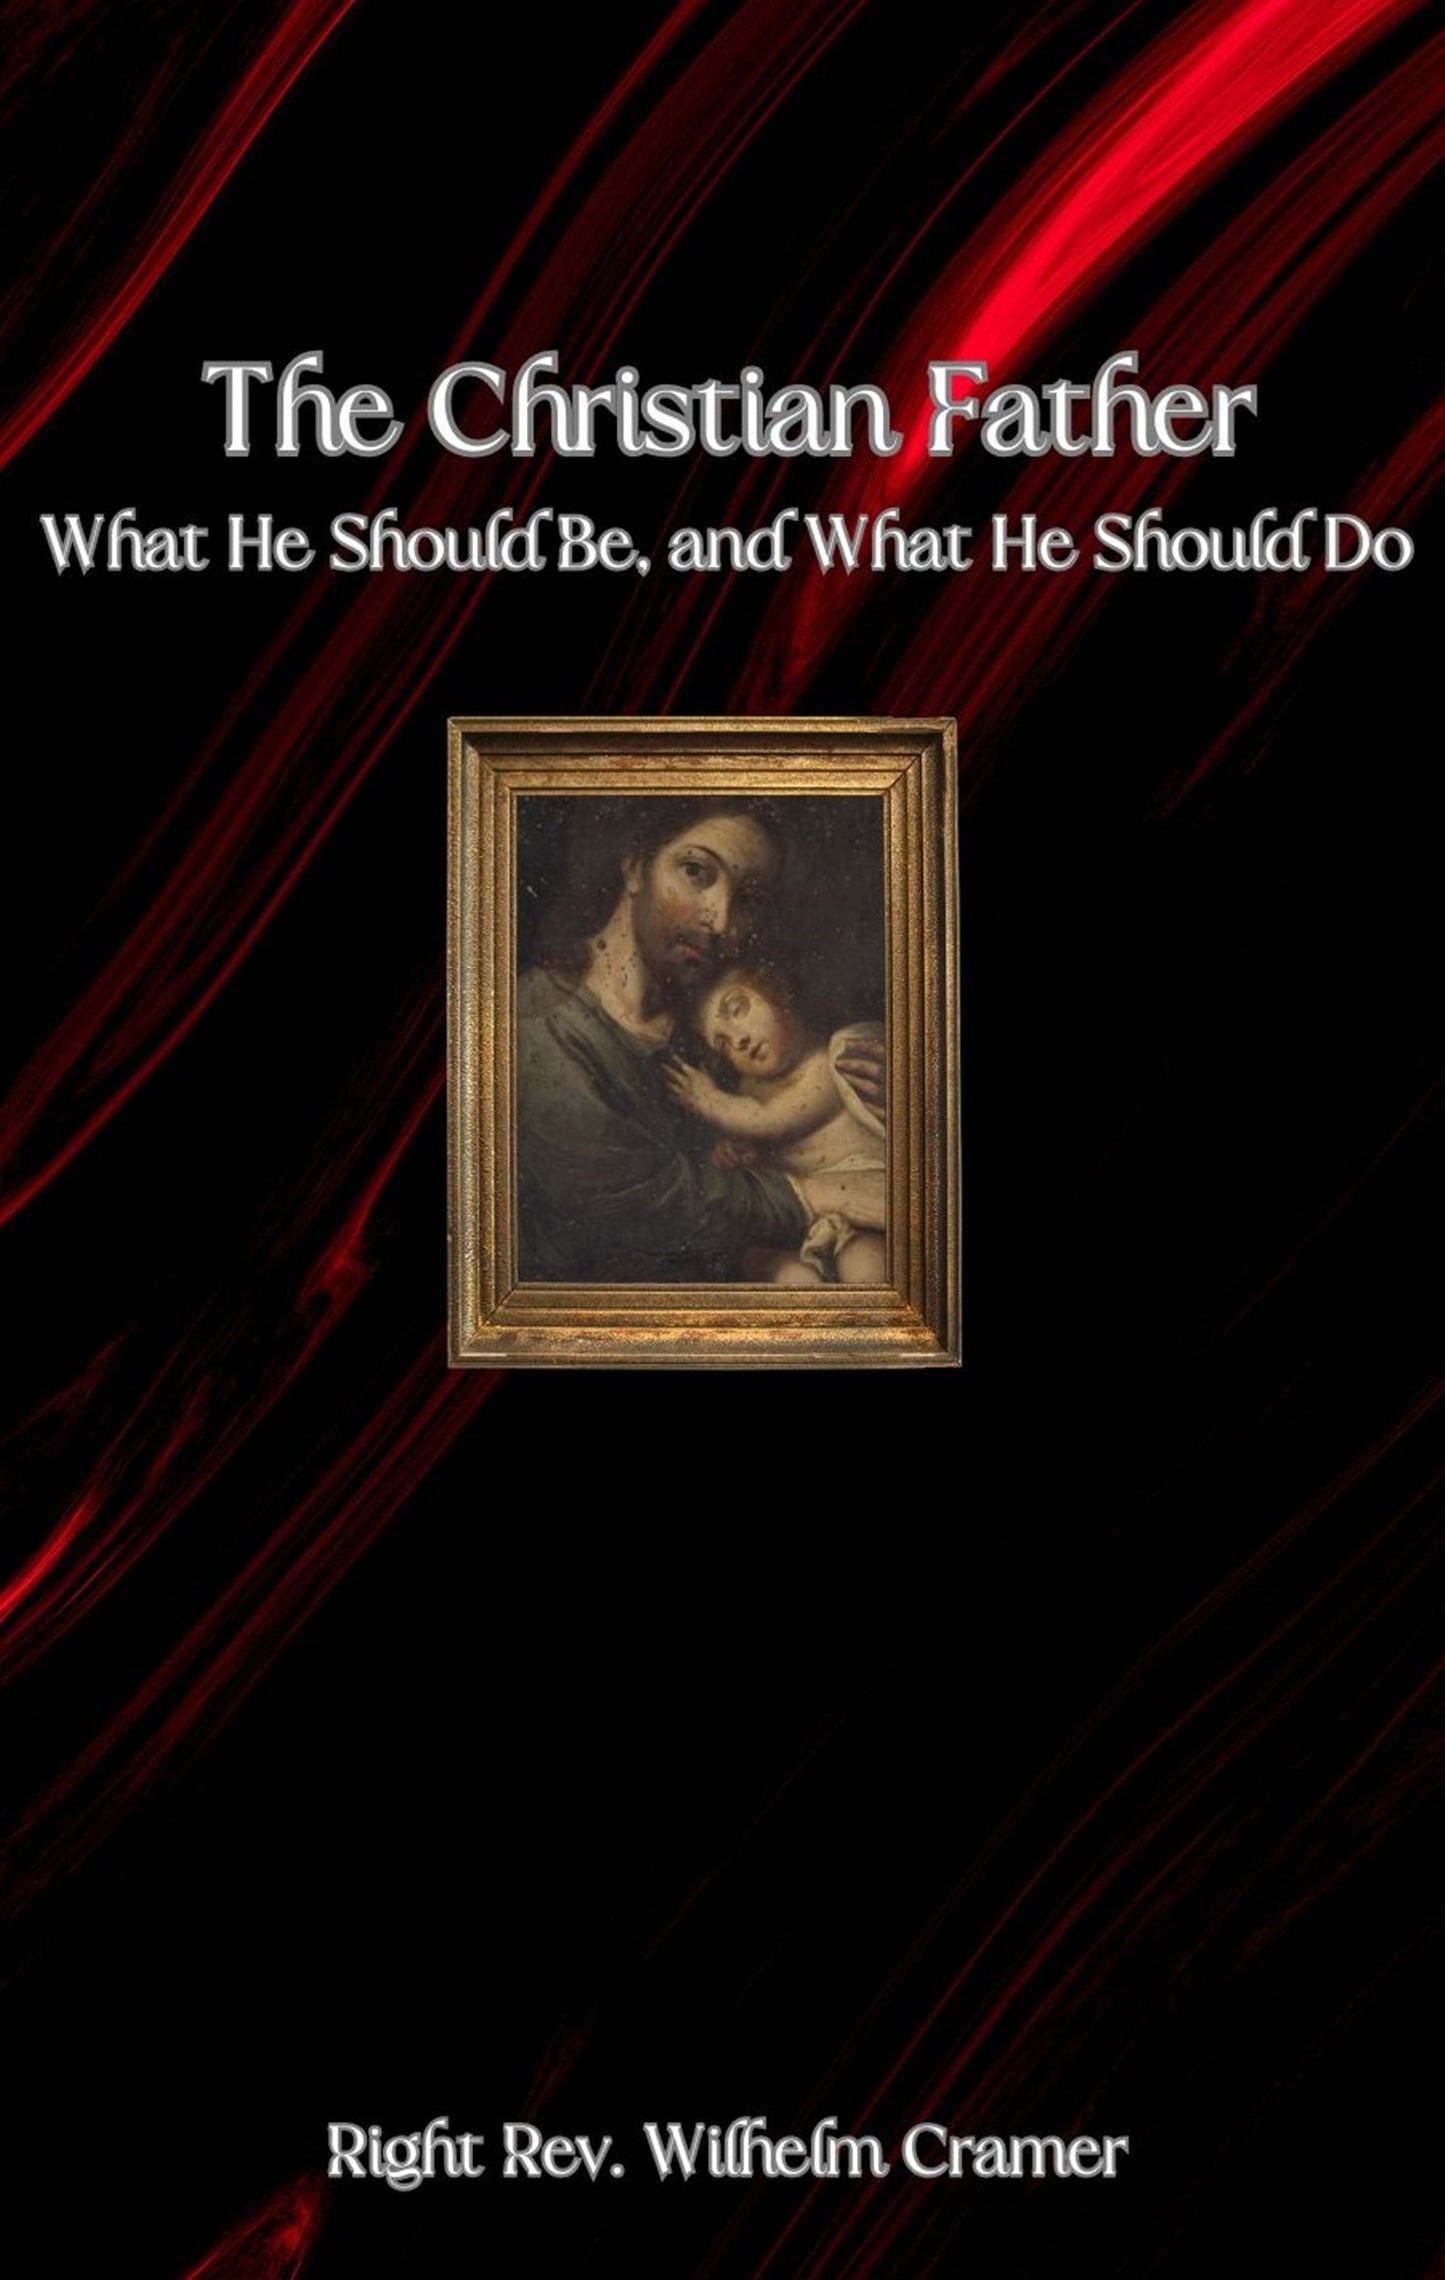 The Christian Father: What He Should Be, and What He Should Do (epub)